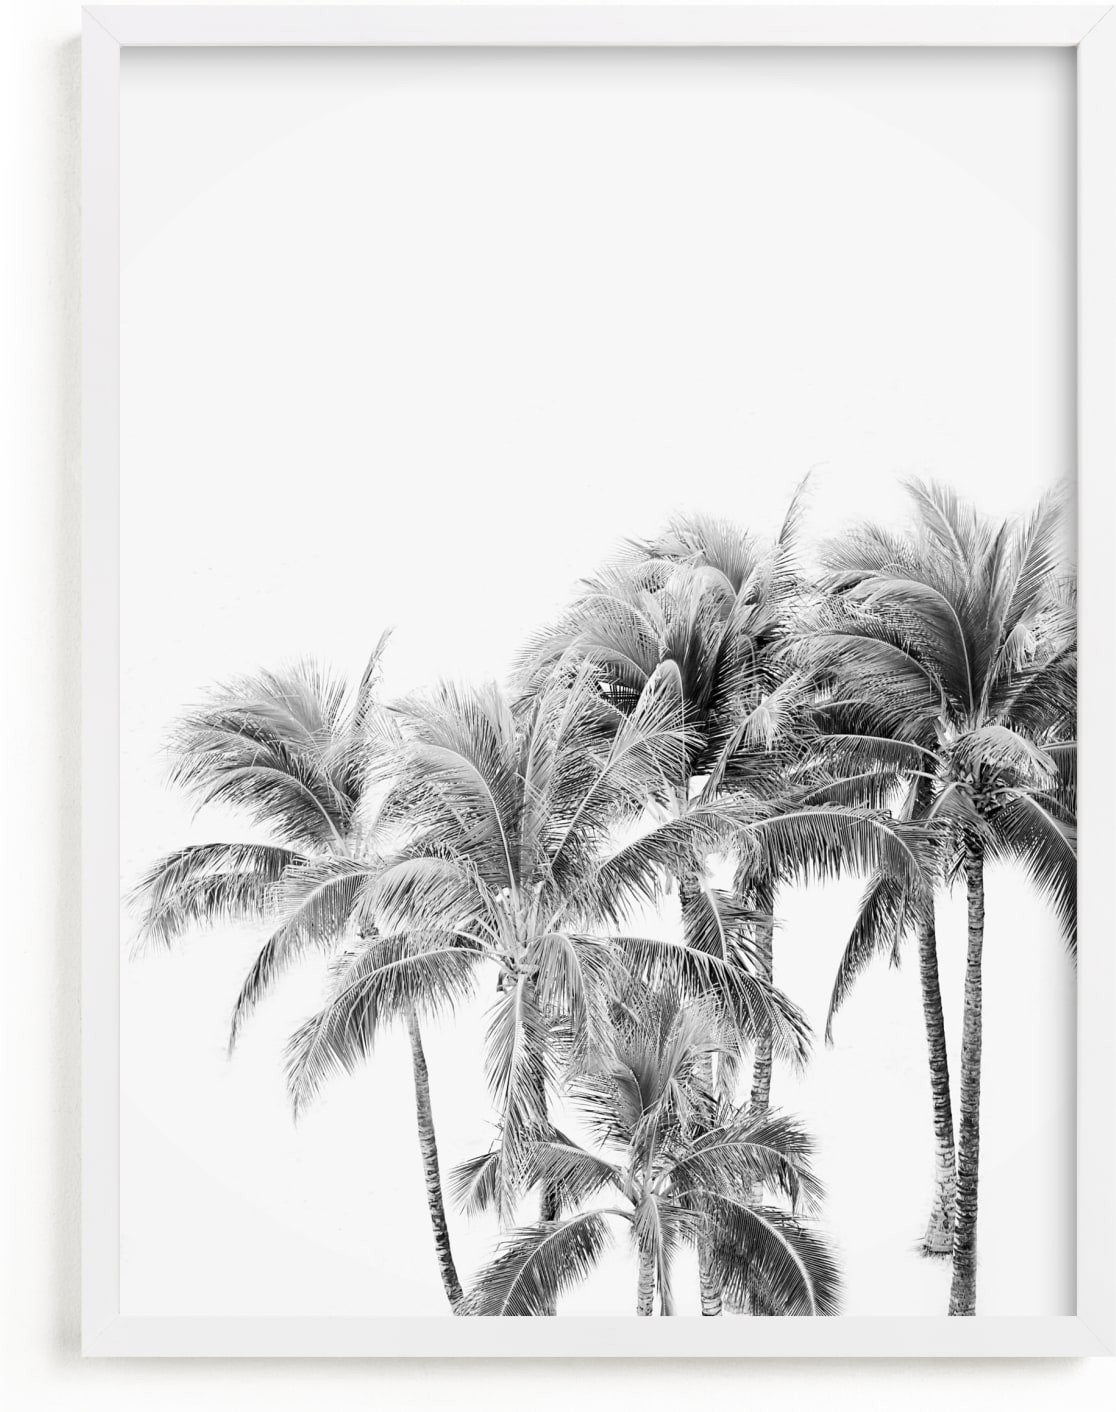 This is a black and white art by Irene Suchocki called Vacation Mode.